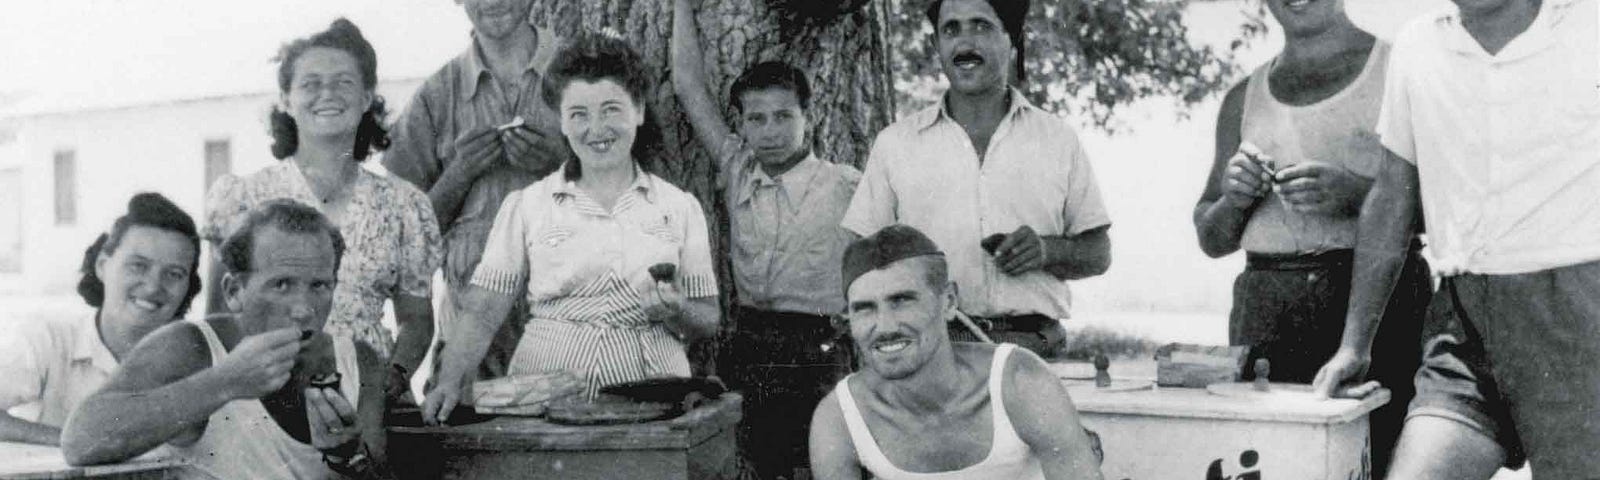 Seven men and three women group together in front of a wooden table and two ice cream carts. A man in the center of the image is smiling and wearing a white tank top and shorts. To his left, another man in a white tank top and shorts takes a bite of ice cream.